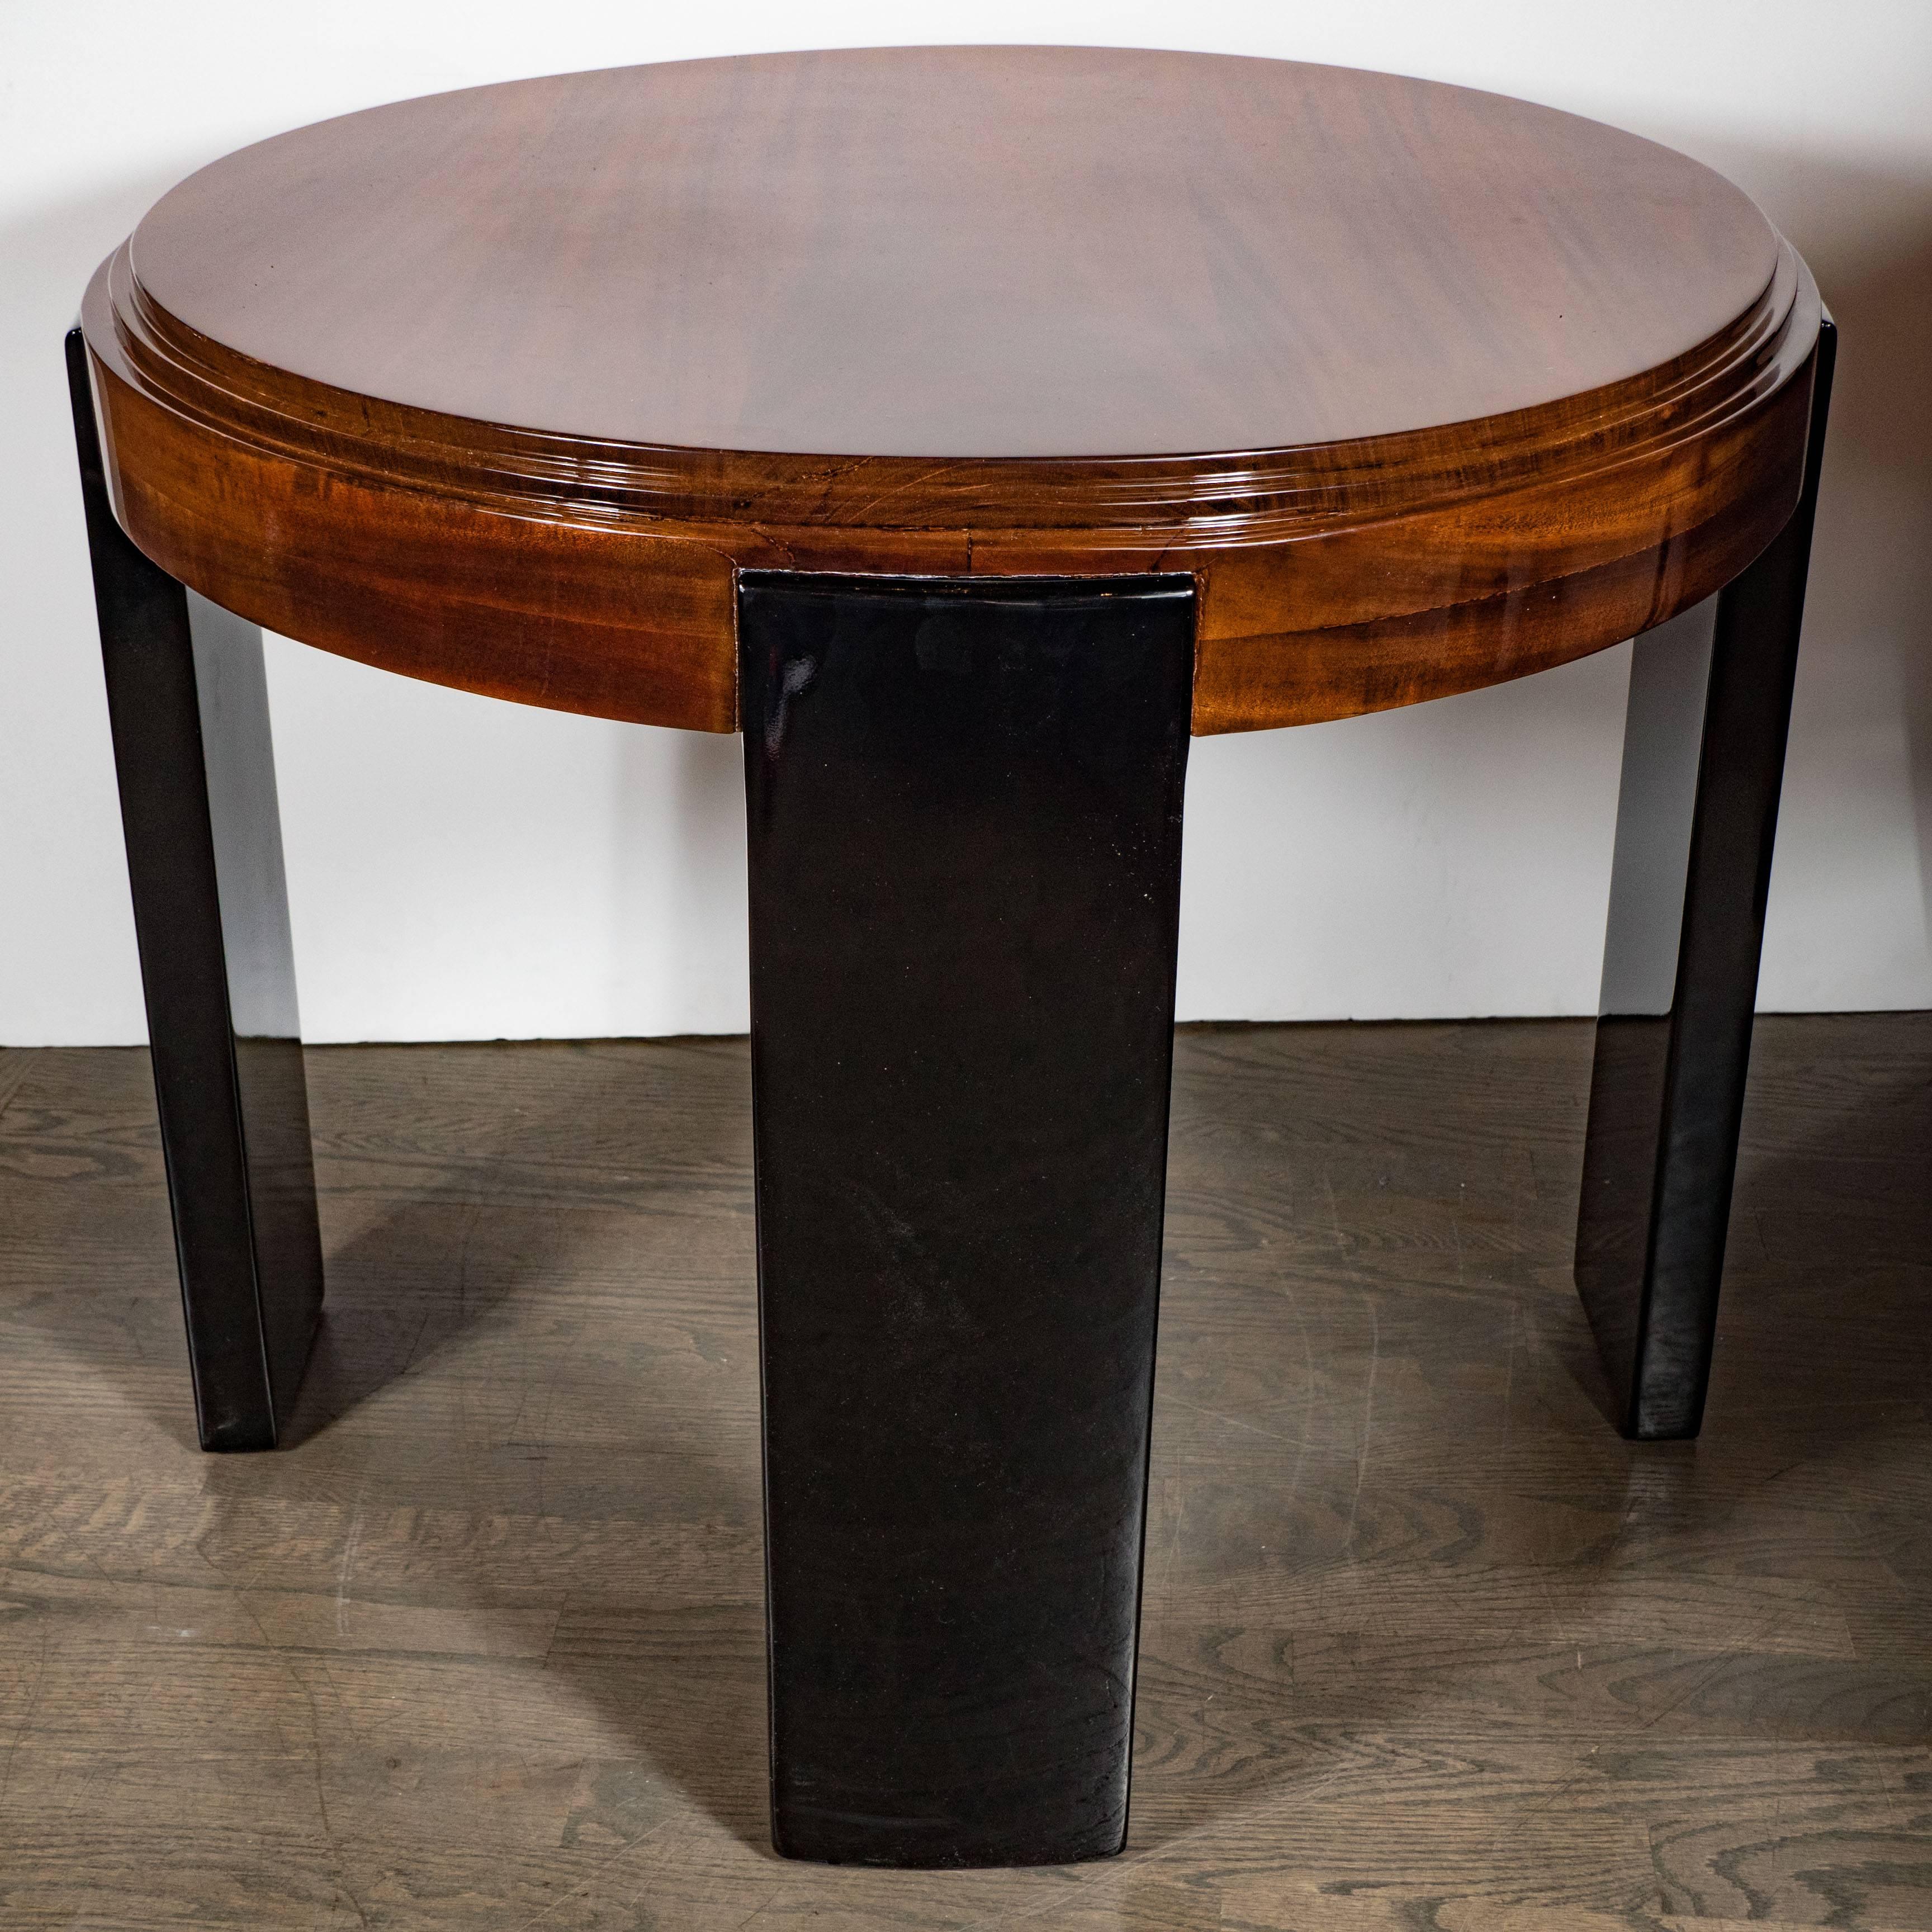 Art Deco Skyscraper Style Stepped Detail Side Table with Black Lacquer Legs In Excellent Condition For Sale In New York, NY